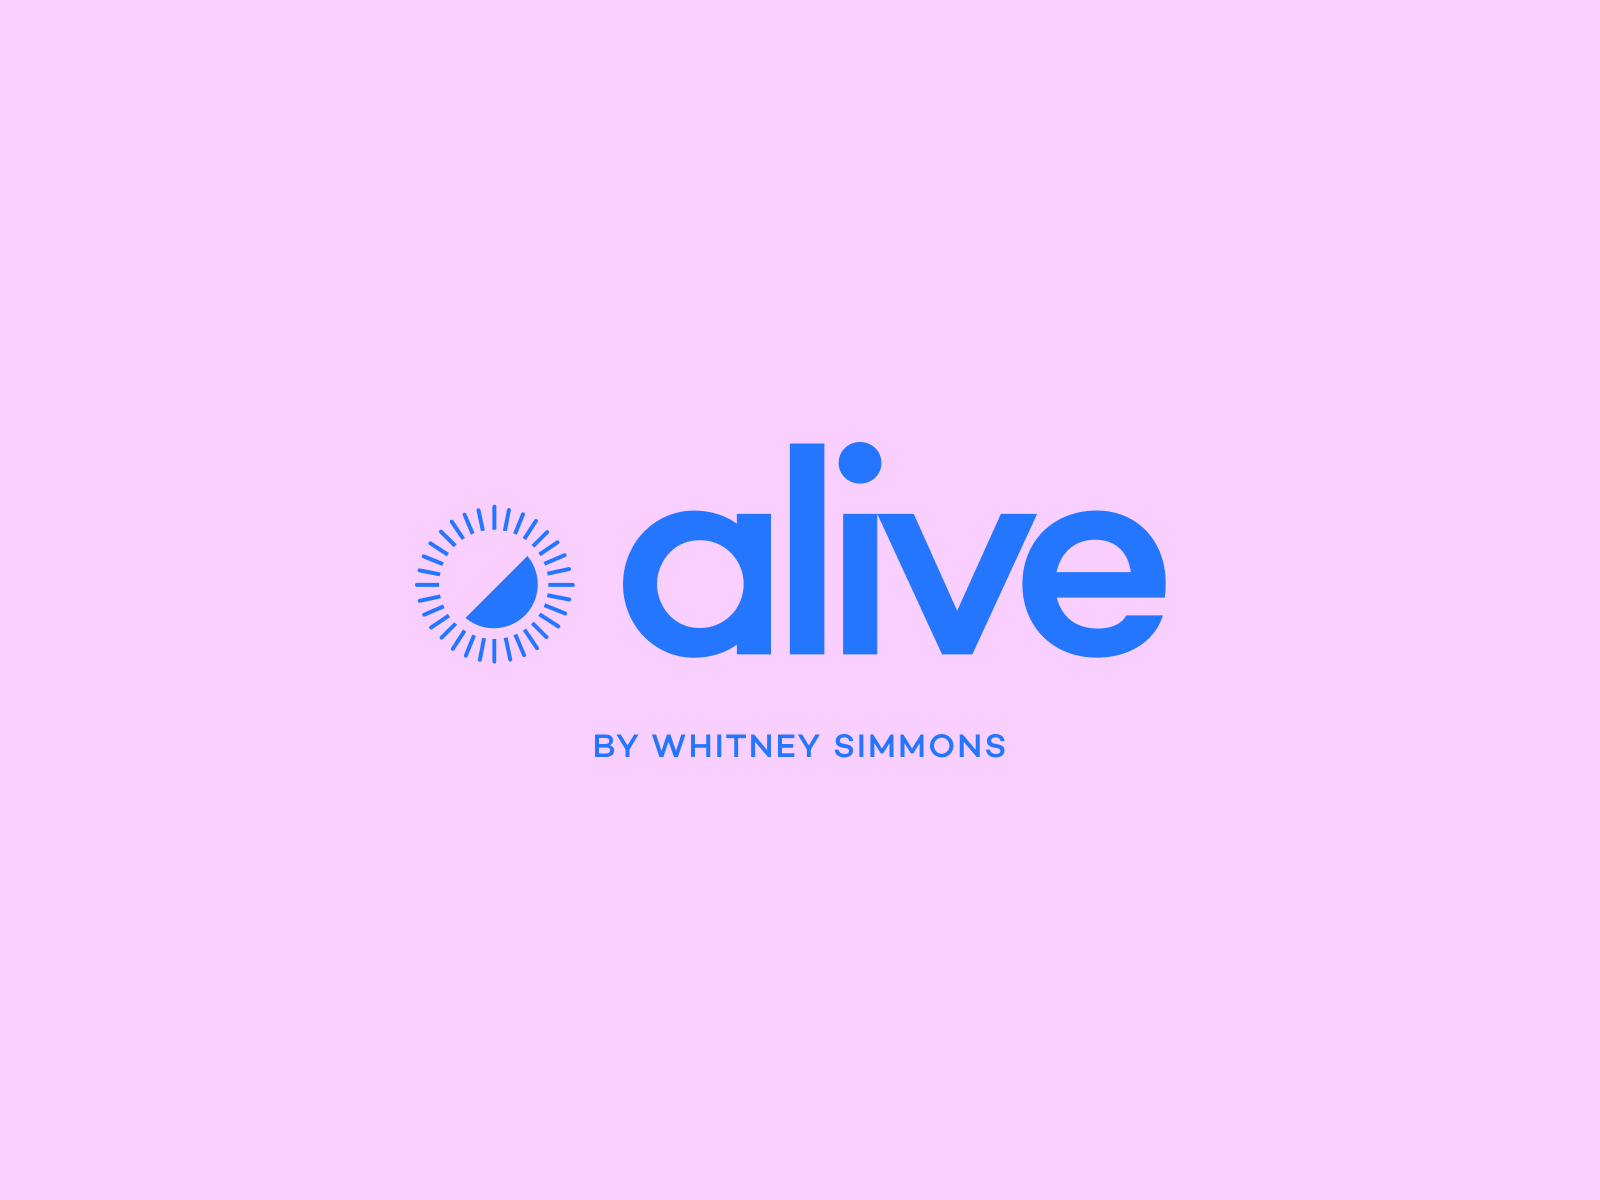 Alive by Whitney Simmons - Branding by Kaleena Chung for Canvas on Dribbble